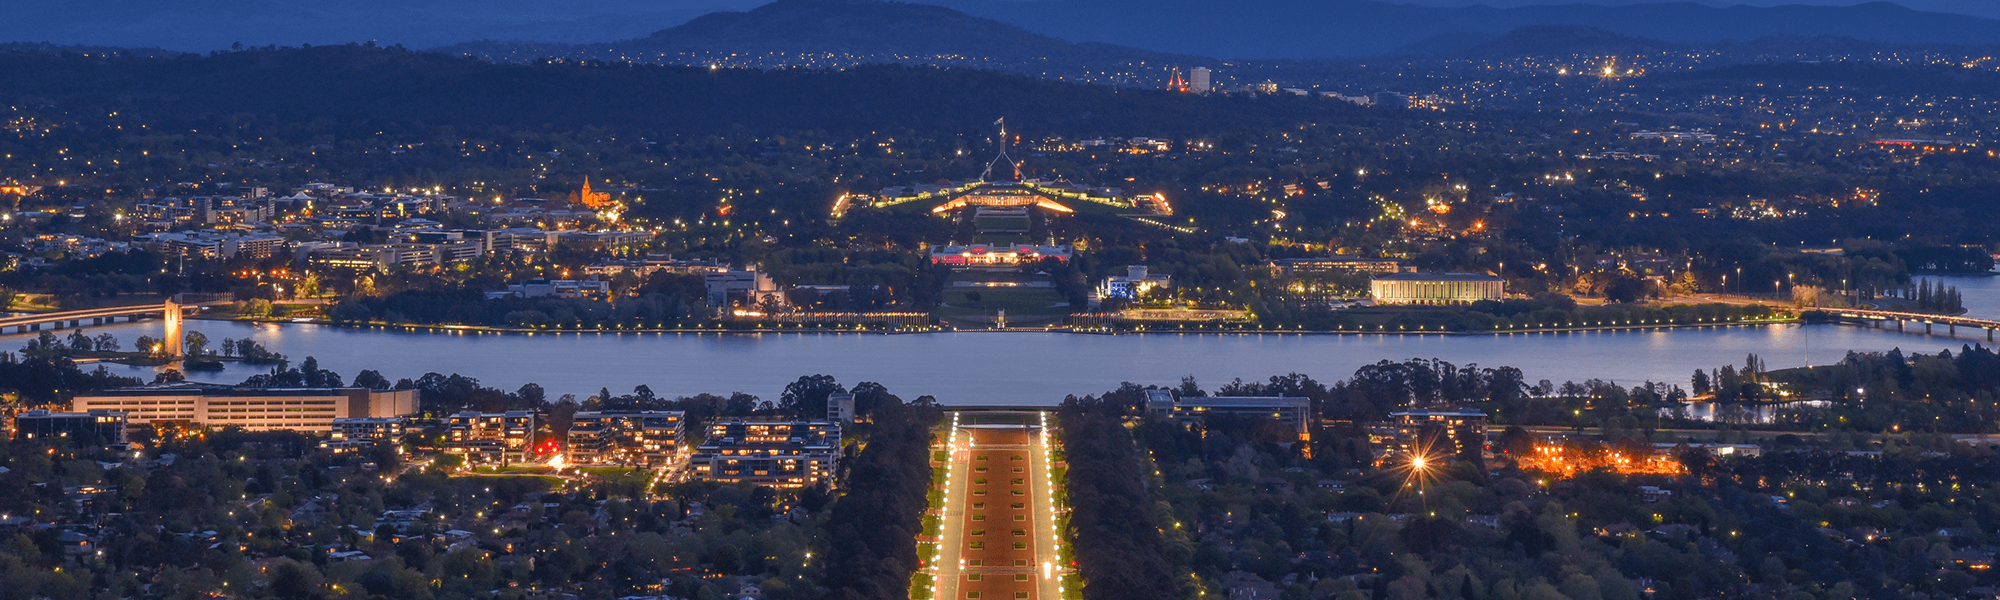 Parliament and Canberra CBD by Night